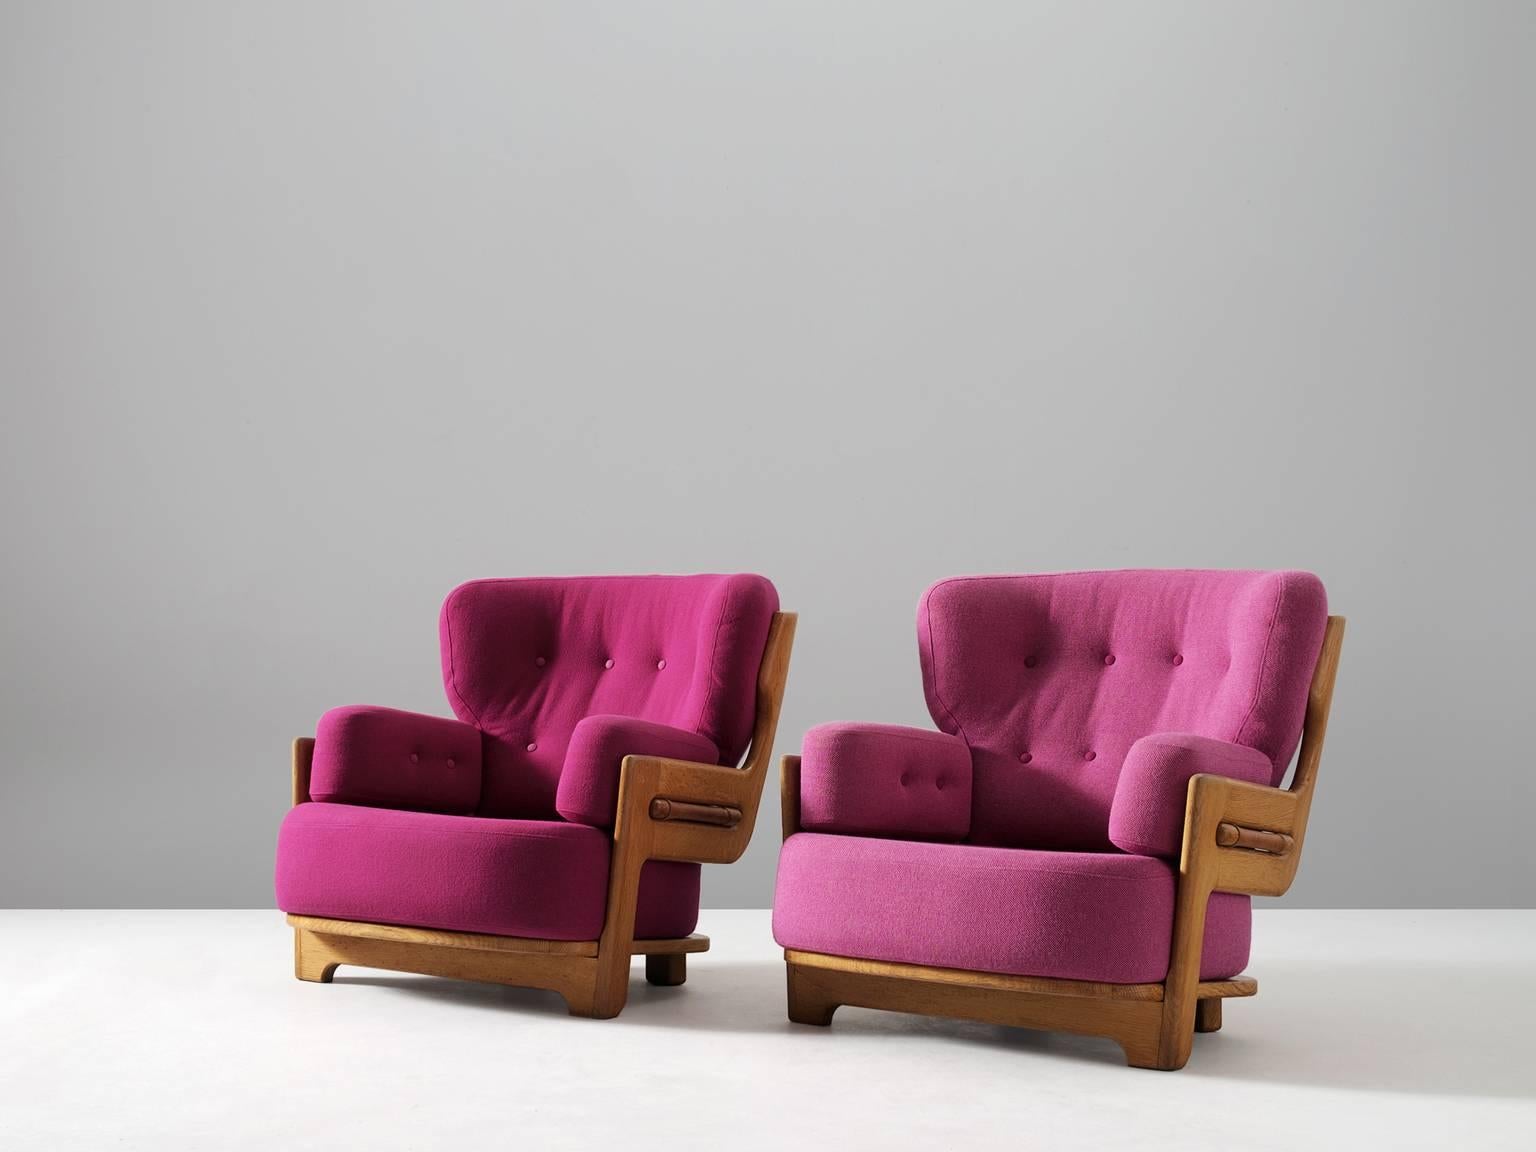 Guillerme et Chambron, set of two lounge chairs, oak and pink fabric, France, 1940s. 

Set of two extraordinary Guillerme and Chambron armchairs in solid oak with the typical characteristic decorative details such as the leather horizontal bars on